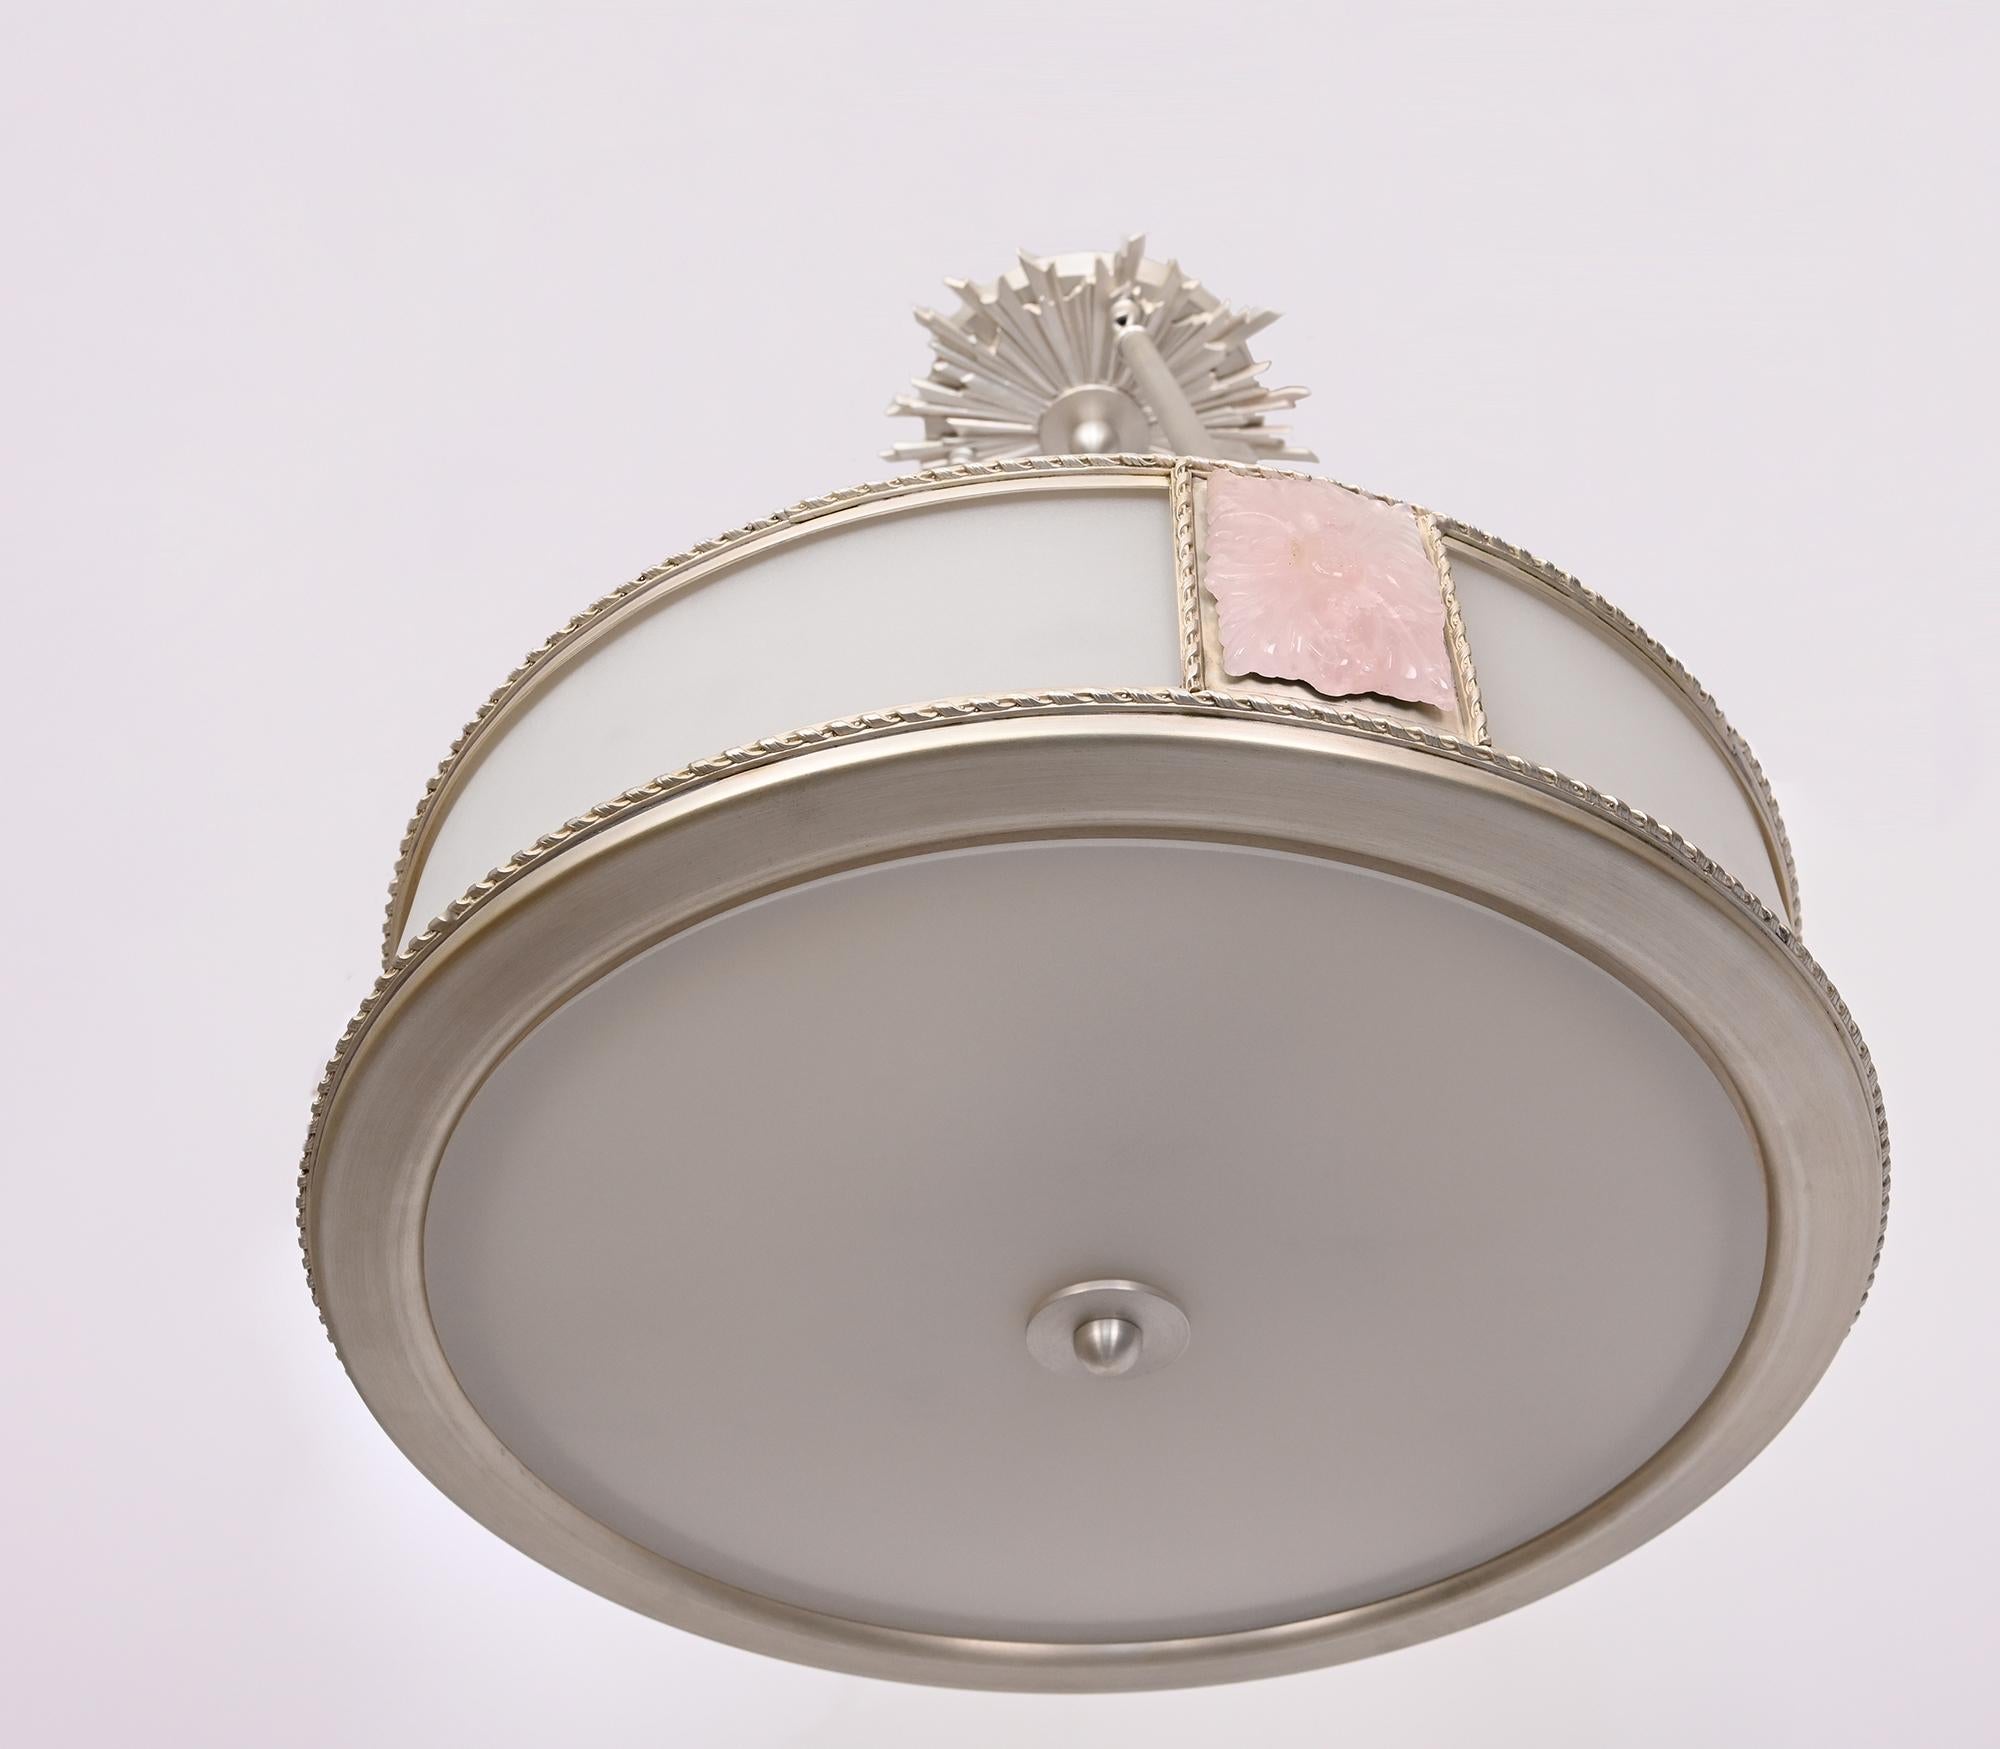 A custom, pendant light fixture with curved frosted glass sides and underside. The Victoire Rose Pendant Light features pink quartz roses, and a silver plate finish suspended by three rods, and cast nickel sunburst adorning the canopy. Four Edison